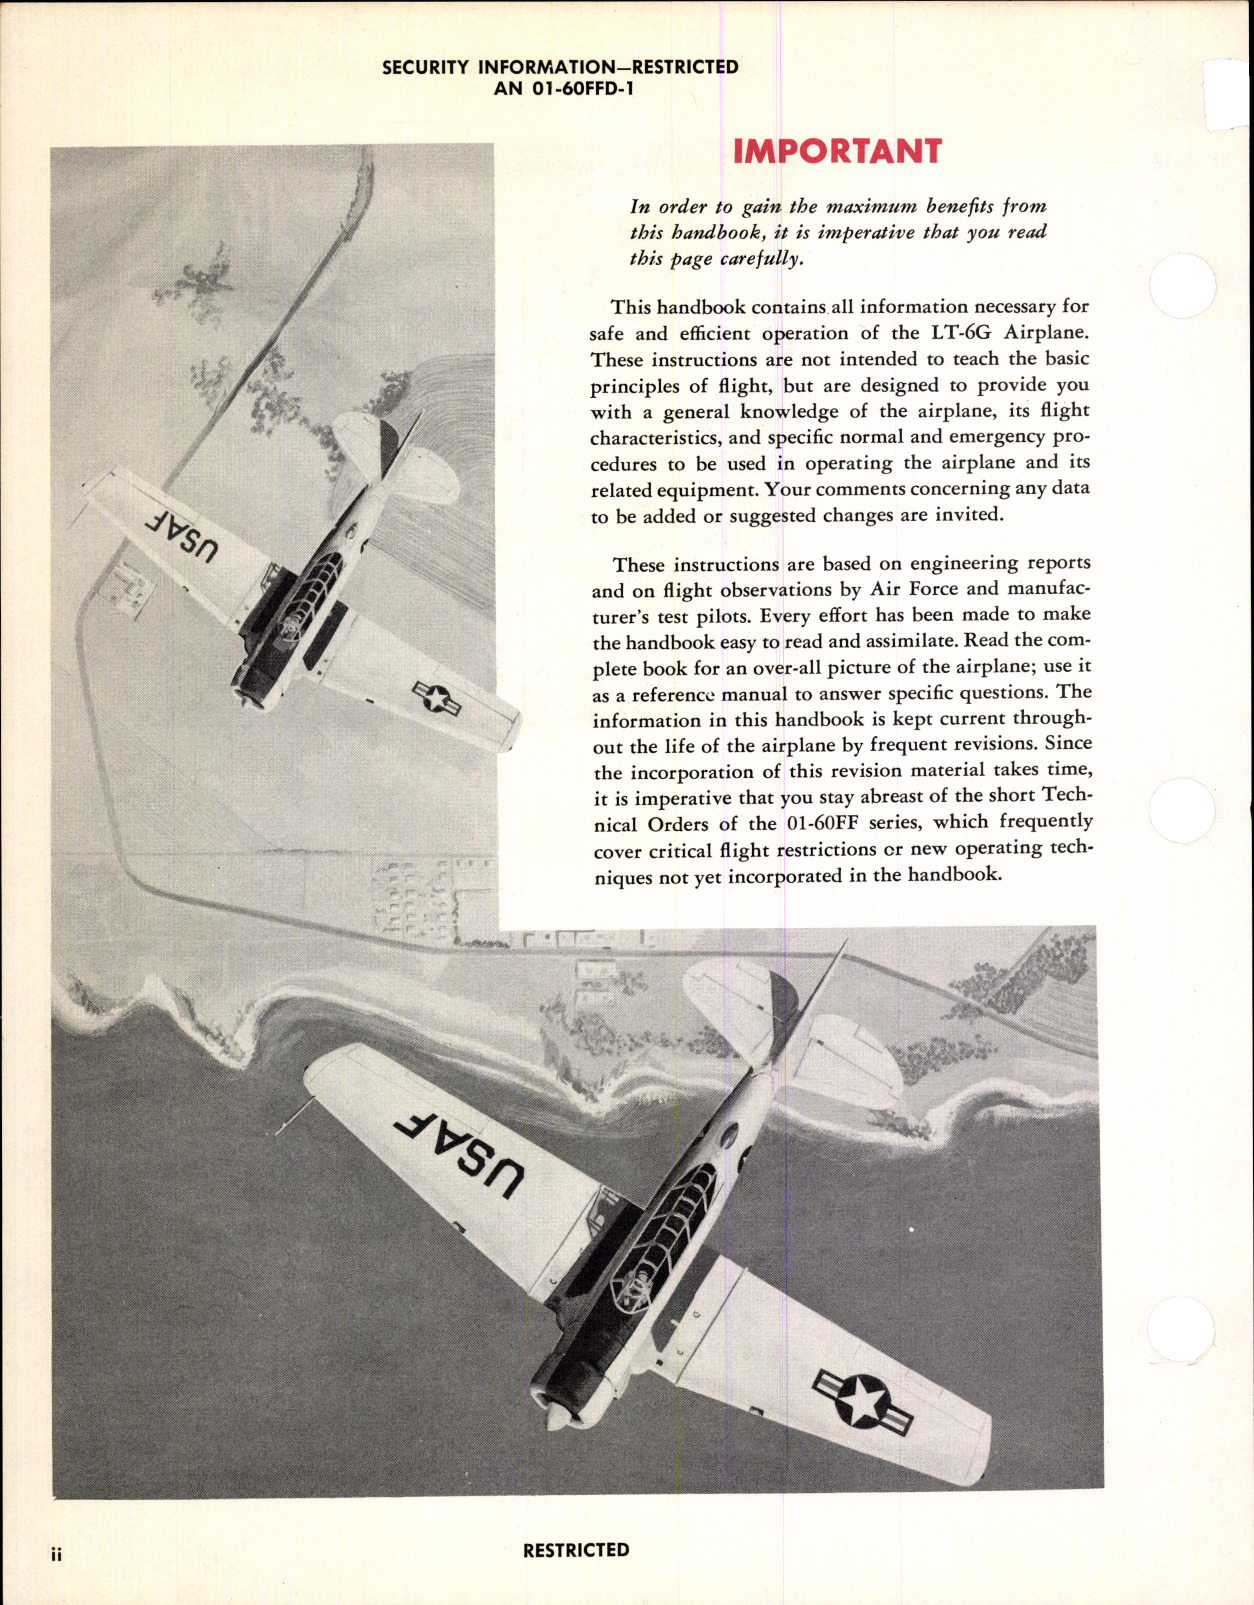 Sample page 4 from AirCorps Library document: Flight Handbook for LT-6G Aircraft